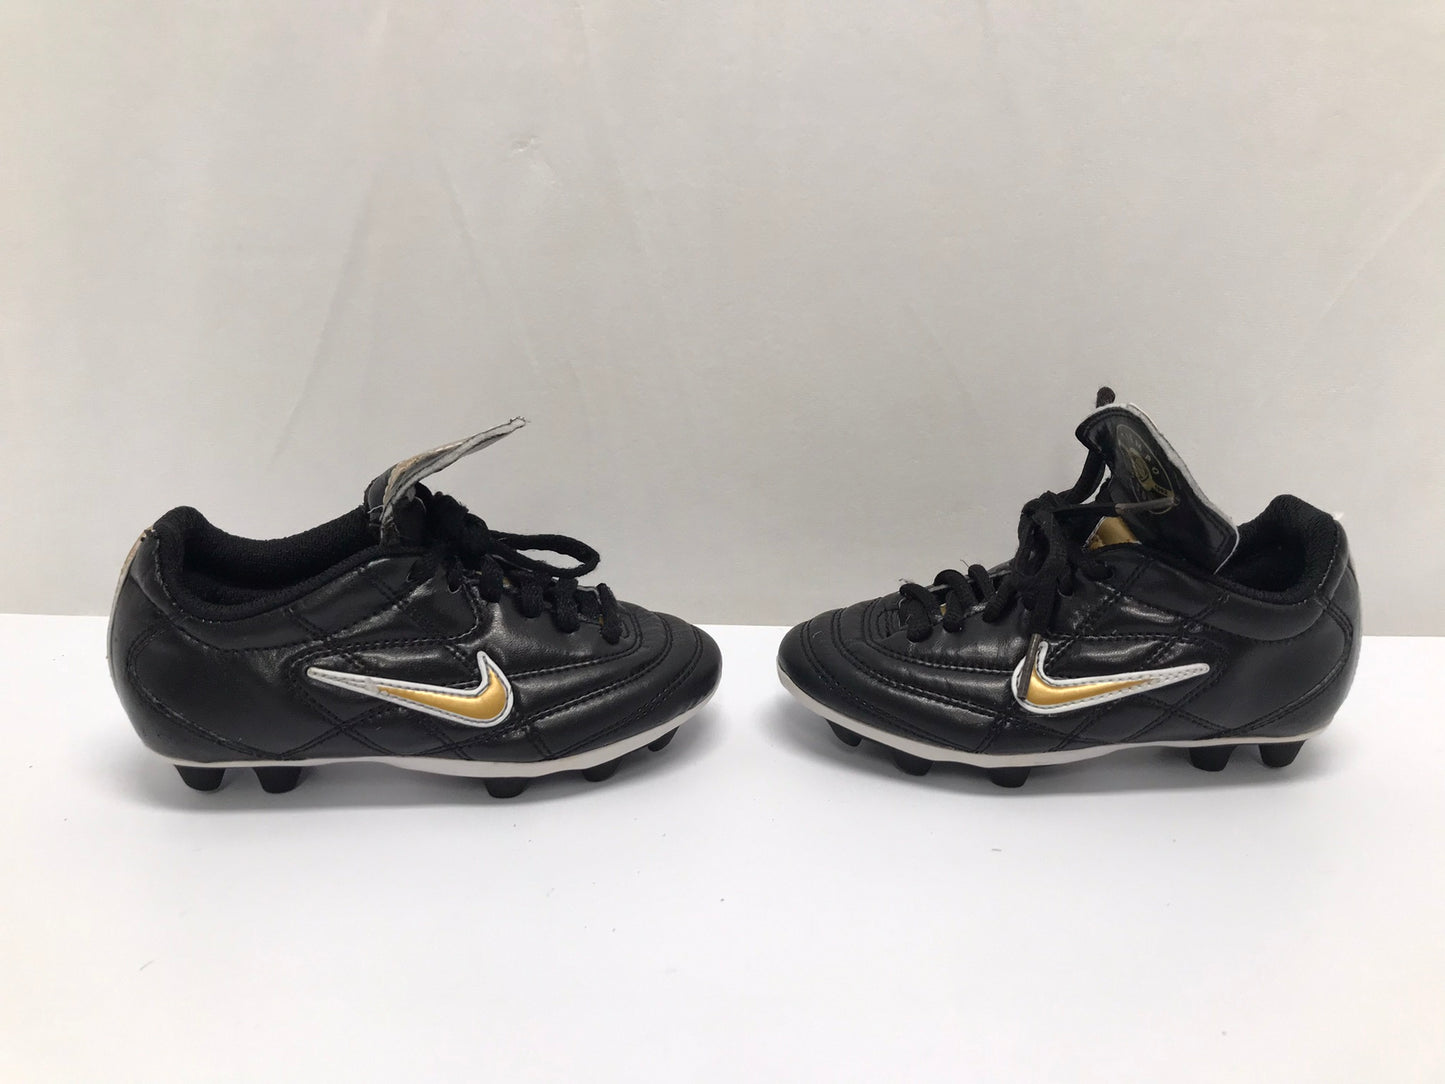 Soccer Shoes Cleats Child Size 9 Toddler Nike Black Gold